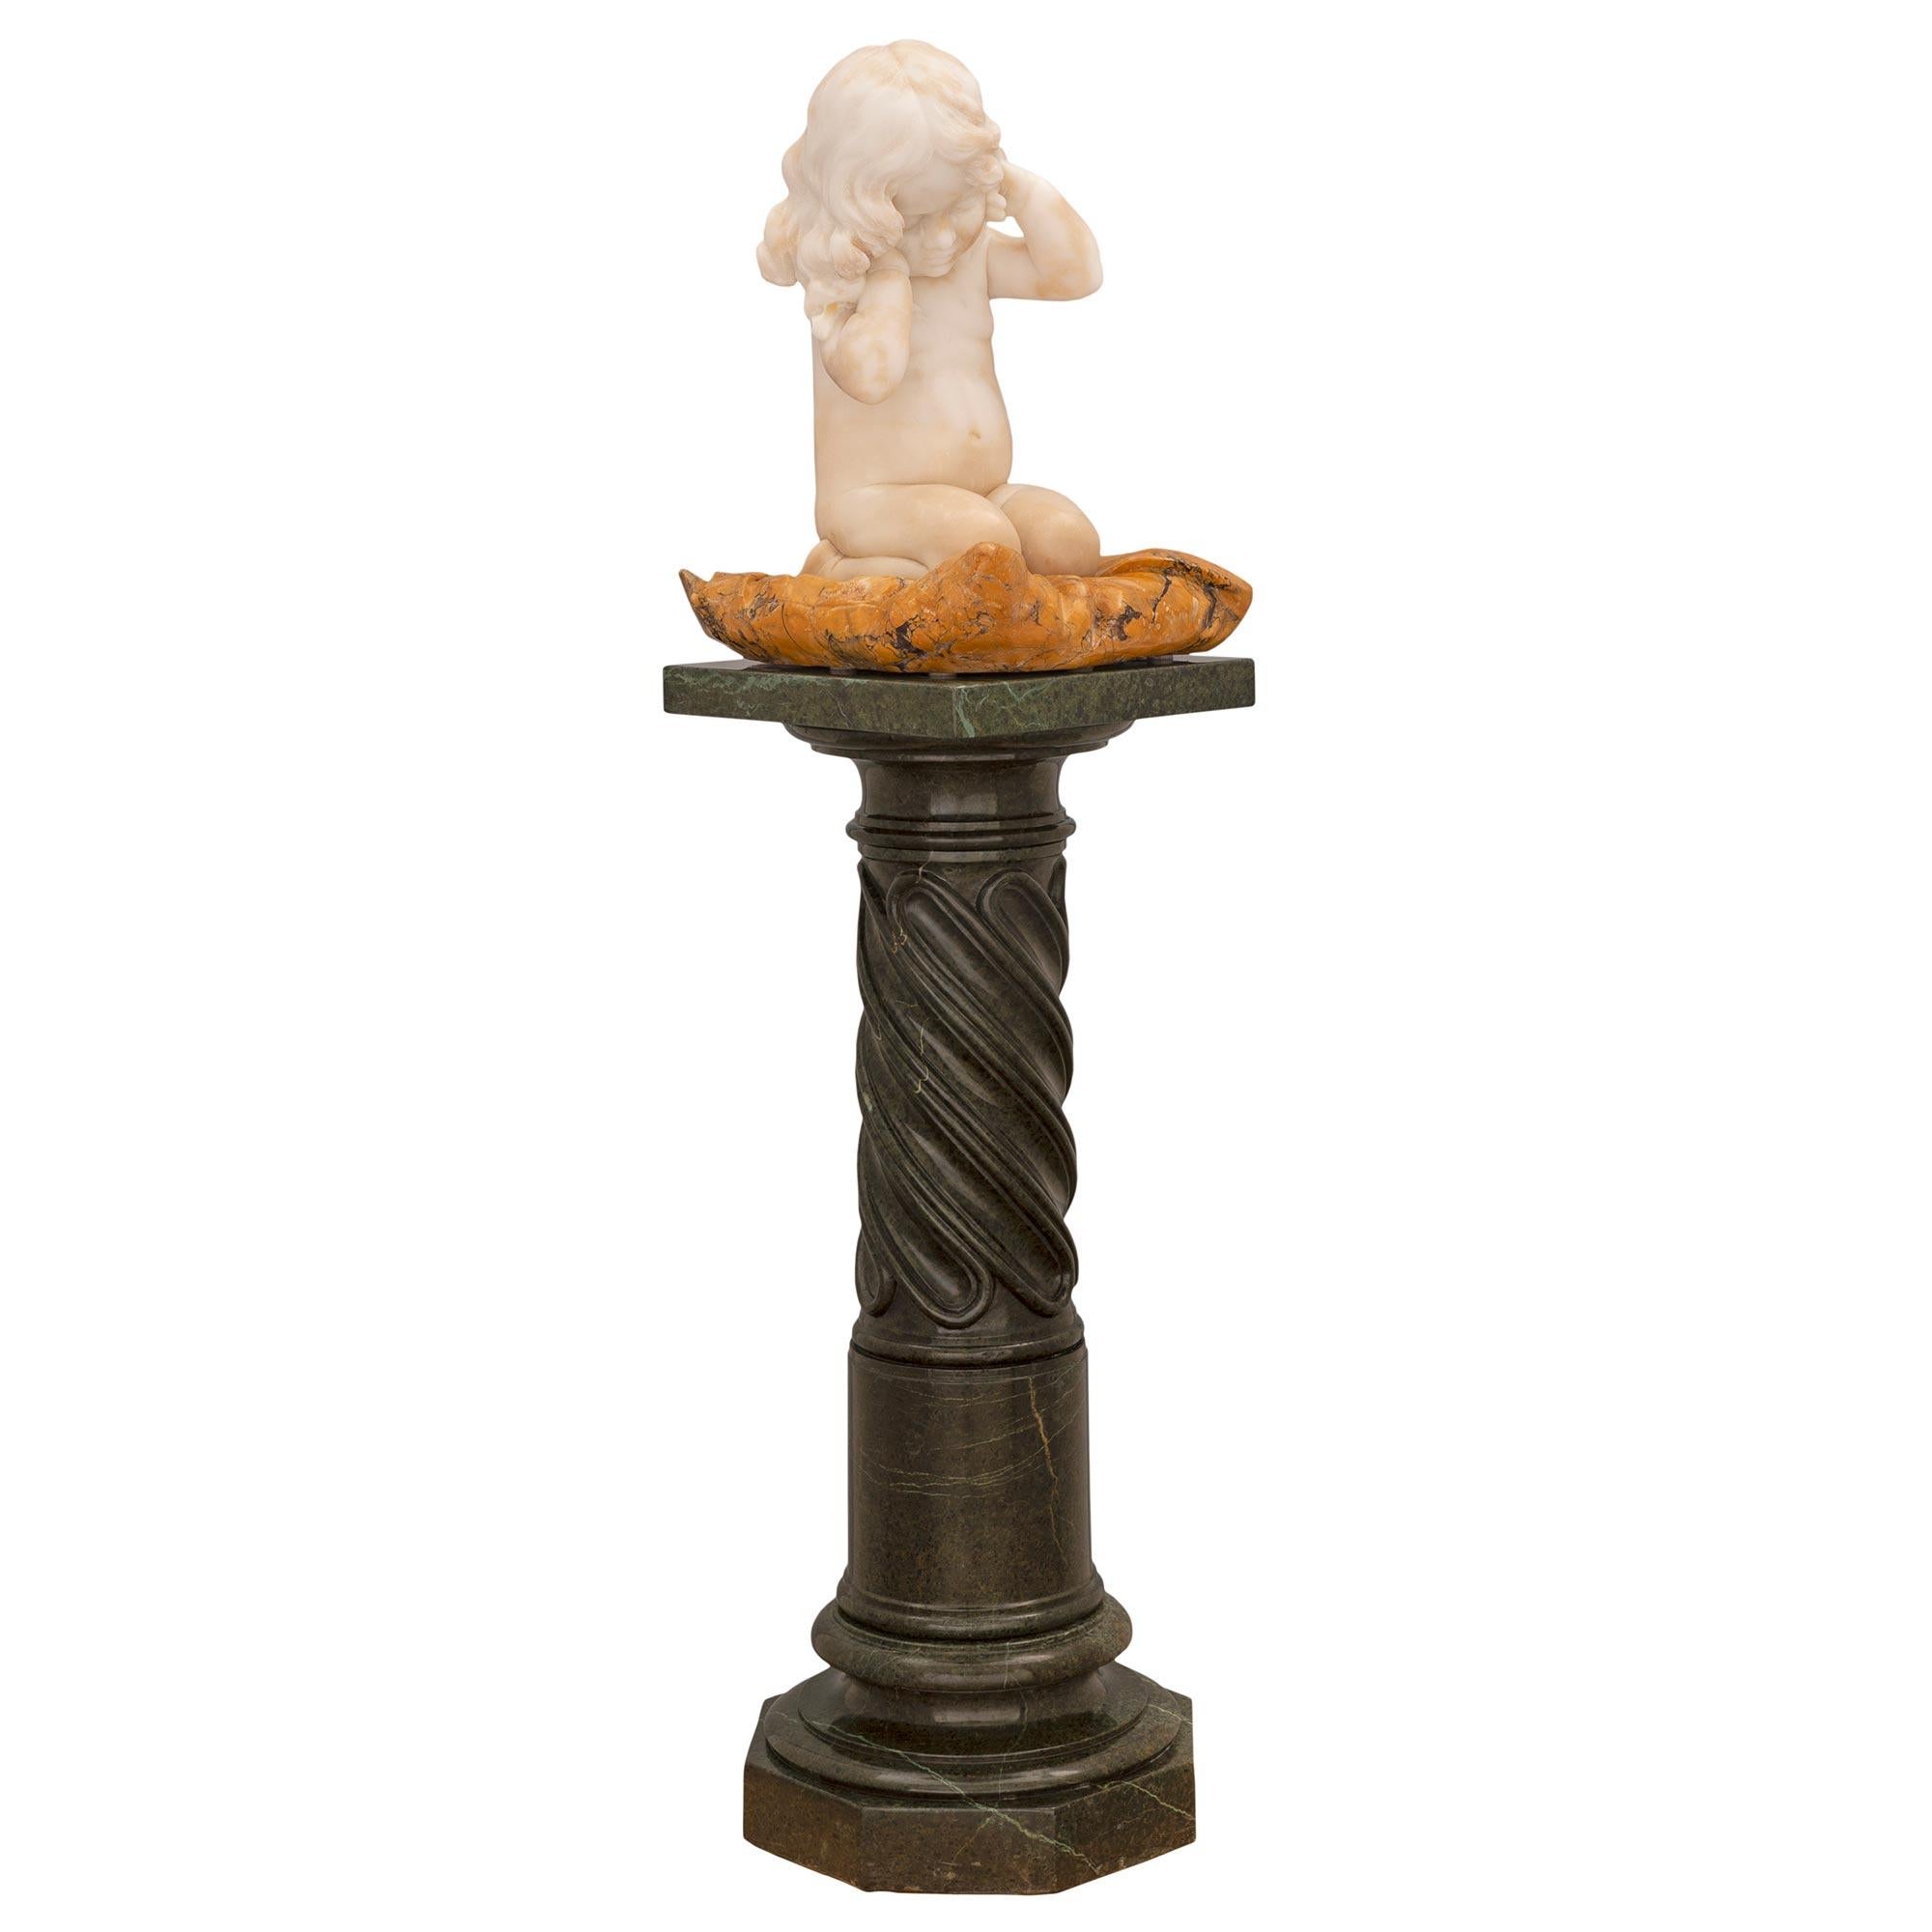 A stunning museum quality Italian 19th century white Carrara, Sienna and Vert de Patricia marble statue on its original pedestal. The pedestal is raised by an elegant octagonal base with a mottled socle shaped support below the most decorative